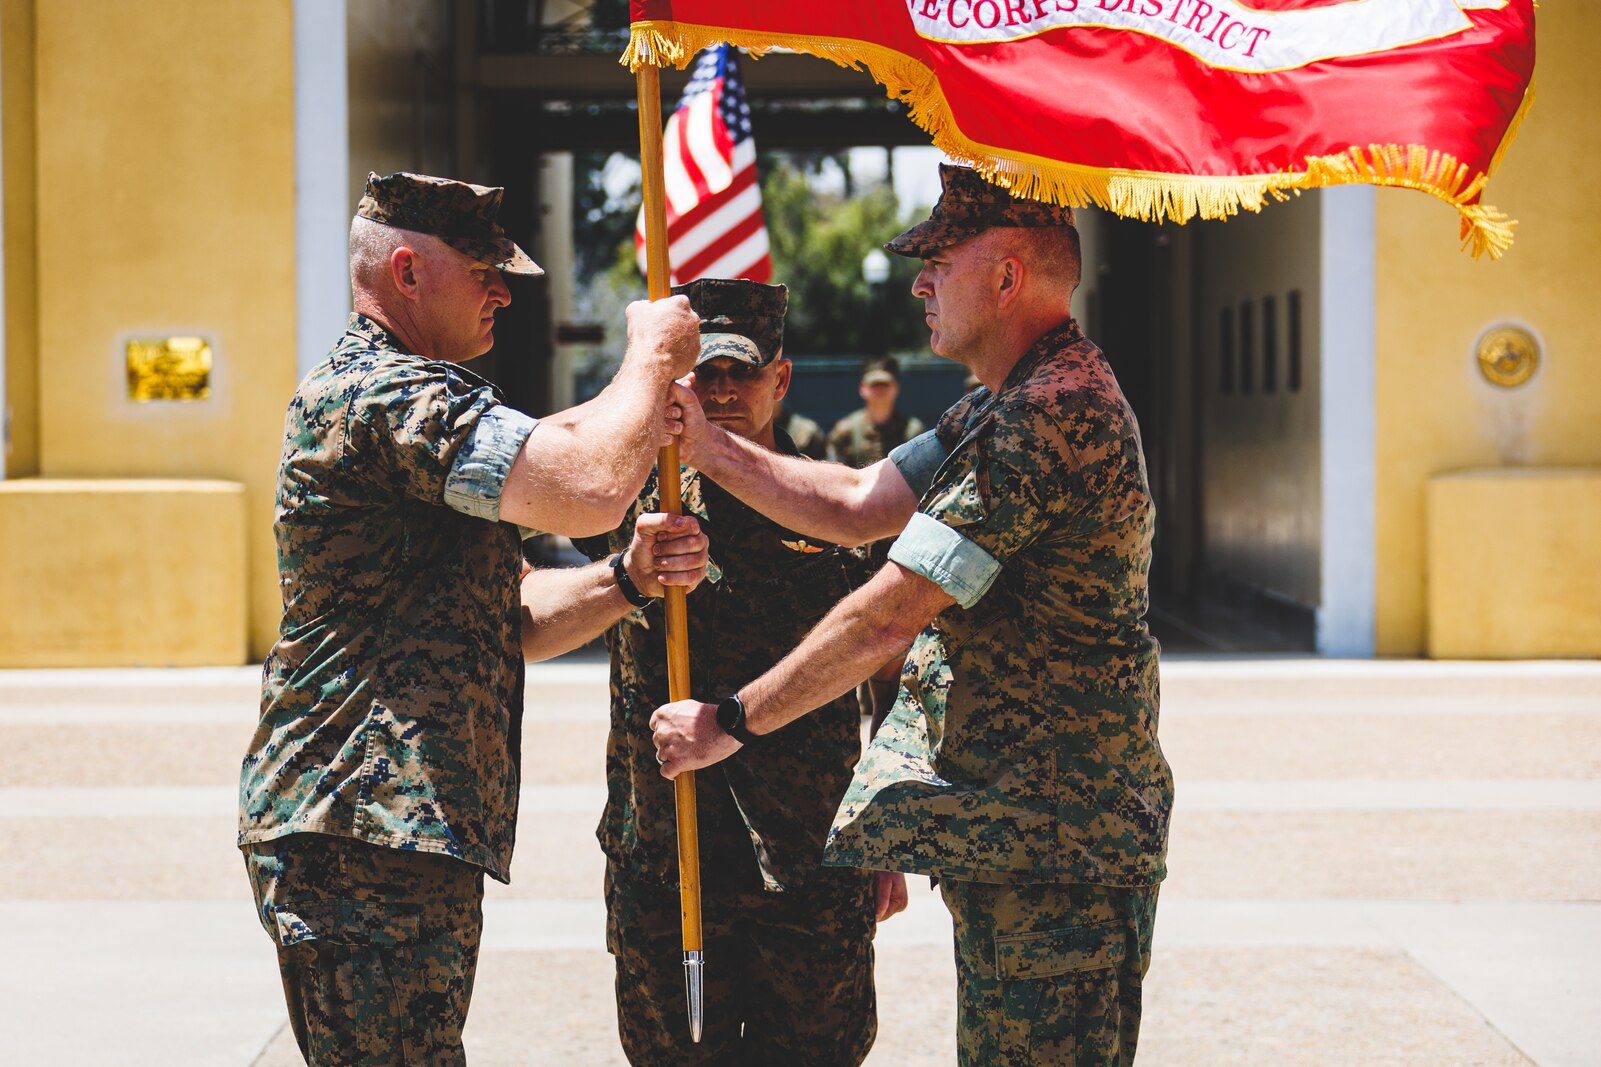 U.S. Marine Corps Col. James B. Conway (right), the outgoing commanding officer, passes the organizational colors to Col. Mike E. Ogden (left), the oncoming commanding officer, during a change of command and retirement ceremony at Marine Corps Recruit Depot San Diego, California, July 15, 2022.